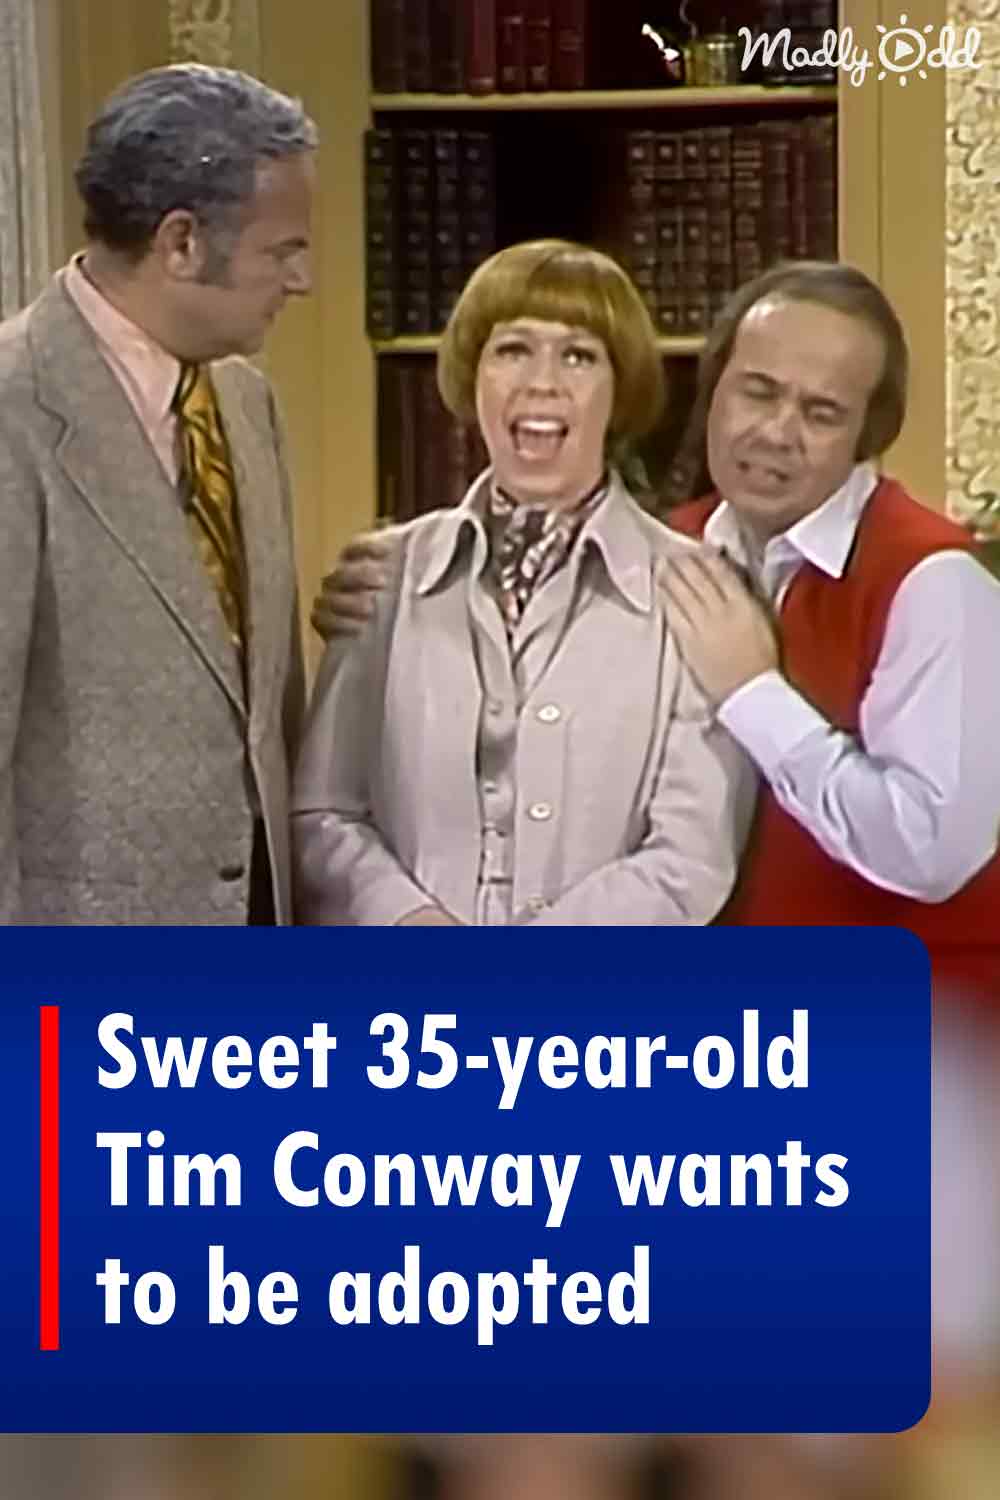 Sweet 35-year-old Tim Conway wants to be adopted